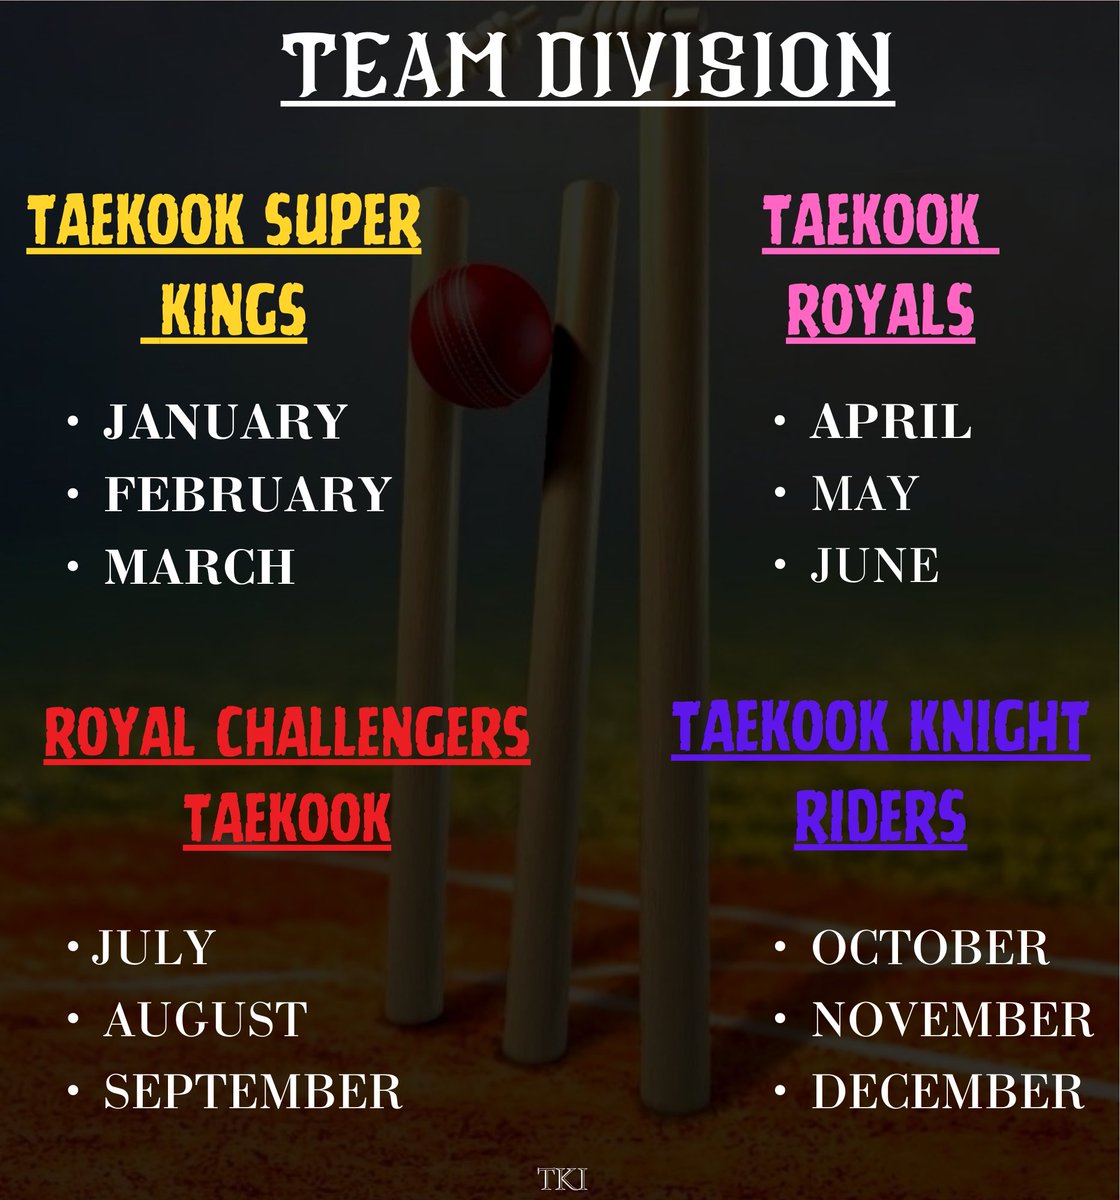 TACOS, ready to find out which TAEKOOK X IPL team you belong to? Check the poster below for your team distribution as per your birth month!

#IPLwithTAEKOOK